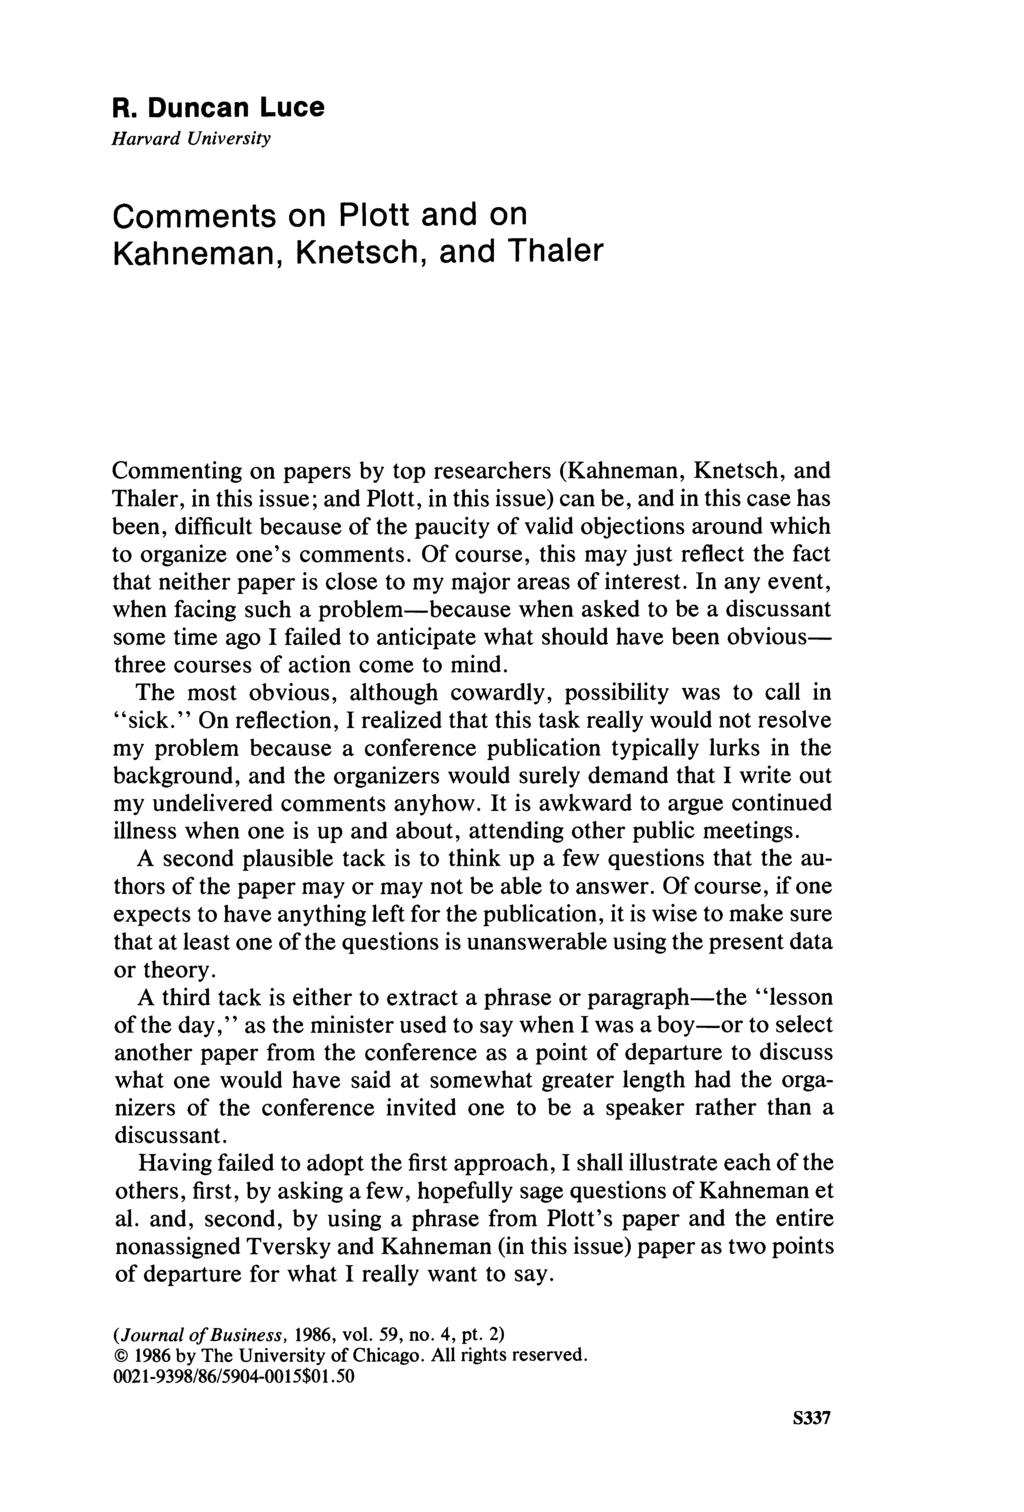 R. Duncan Luce Harvard Universio Comments on Plott and on Kahneman, Knetsch, and Thaler Commenting on papers by top researchers (Kahneman, Knetsch, and Thaler, in this issue; and Plott, in this